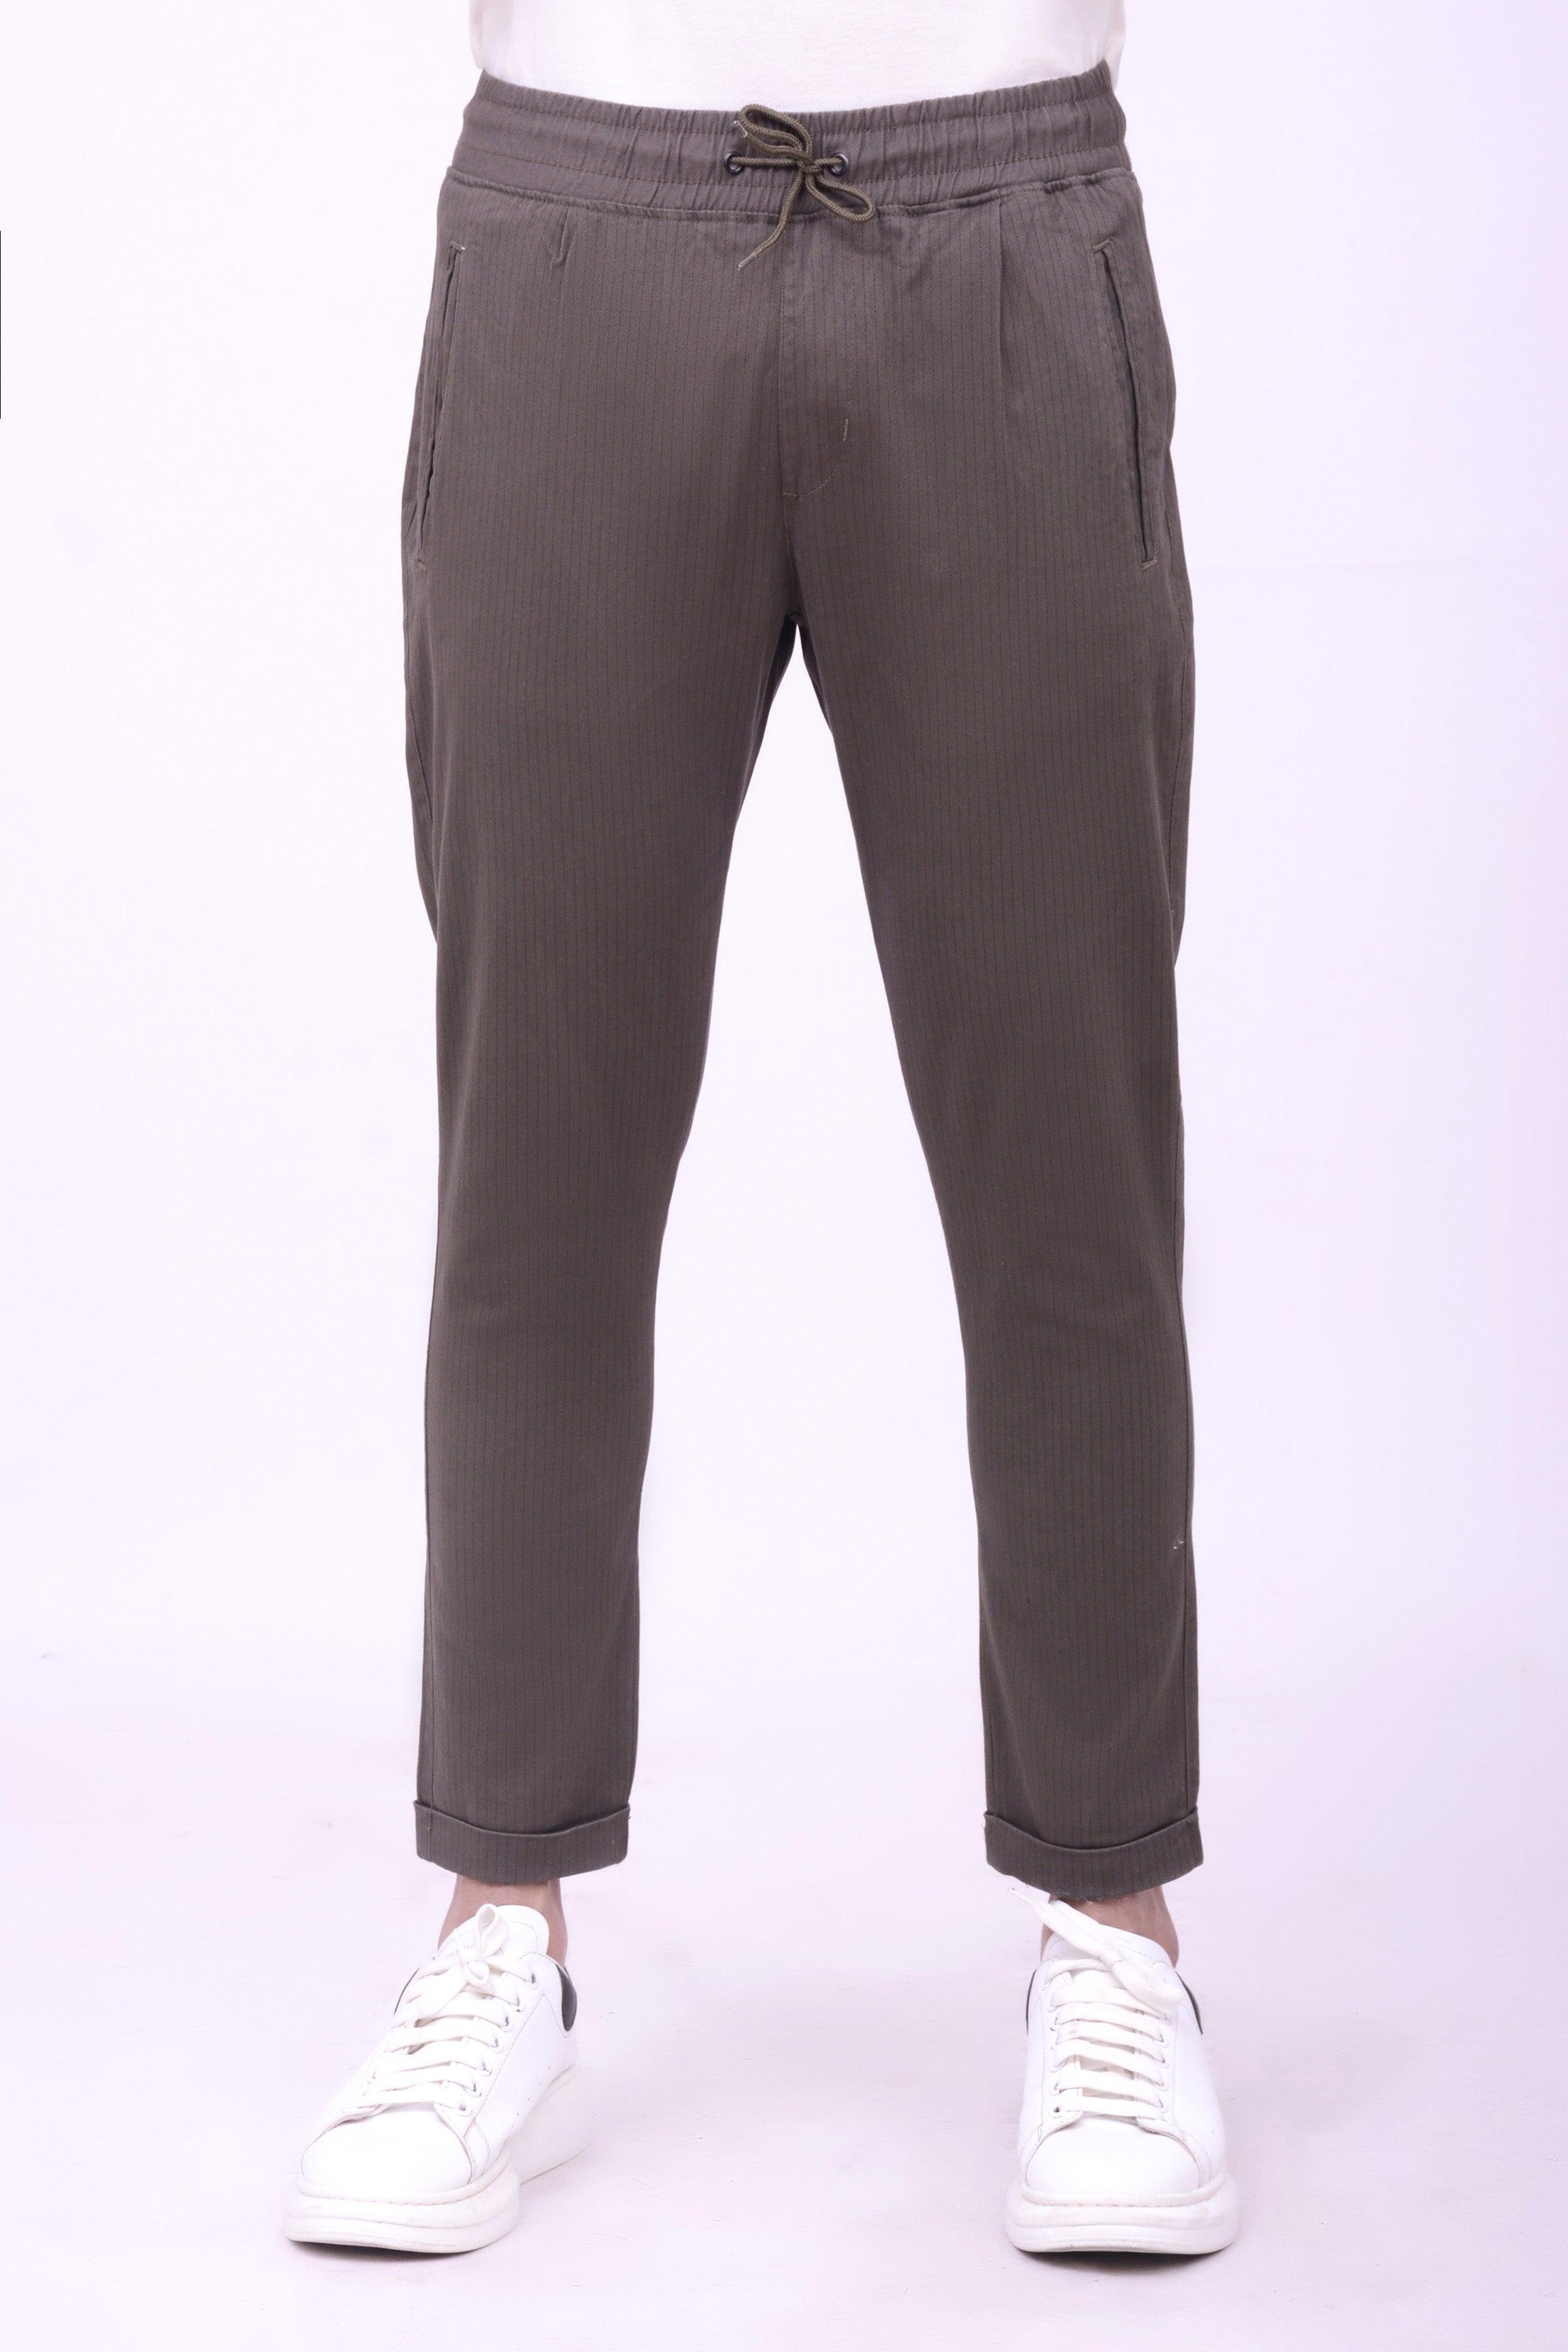 CASUAL JOGGER TROUSER DARK OLIVE at Charcoal Clothing